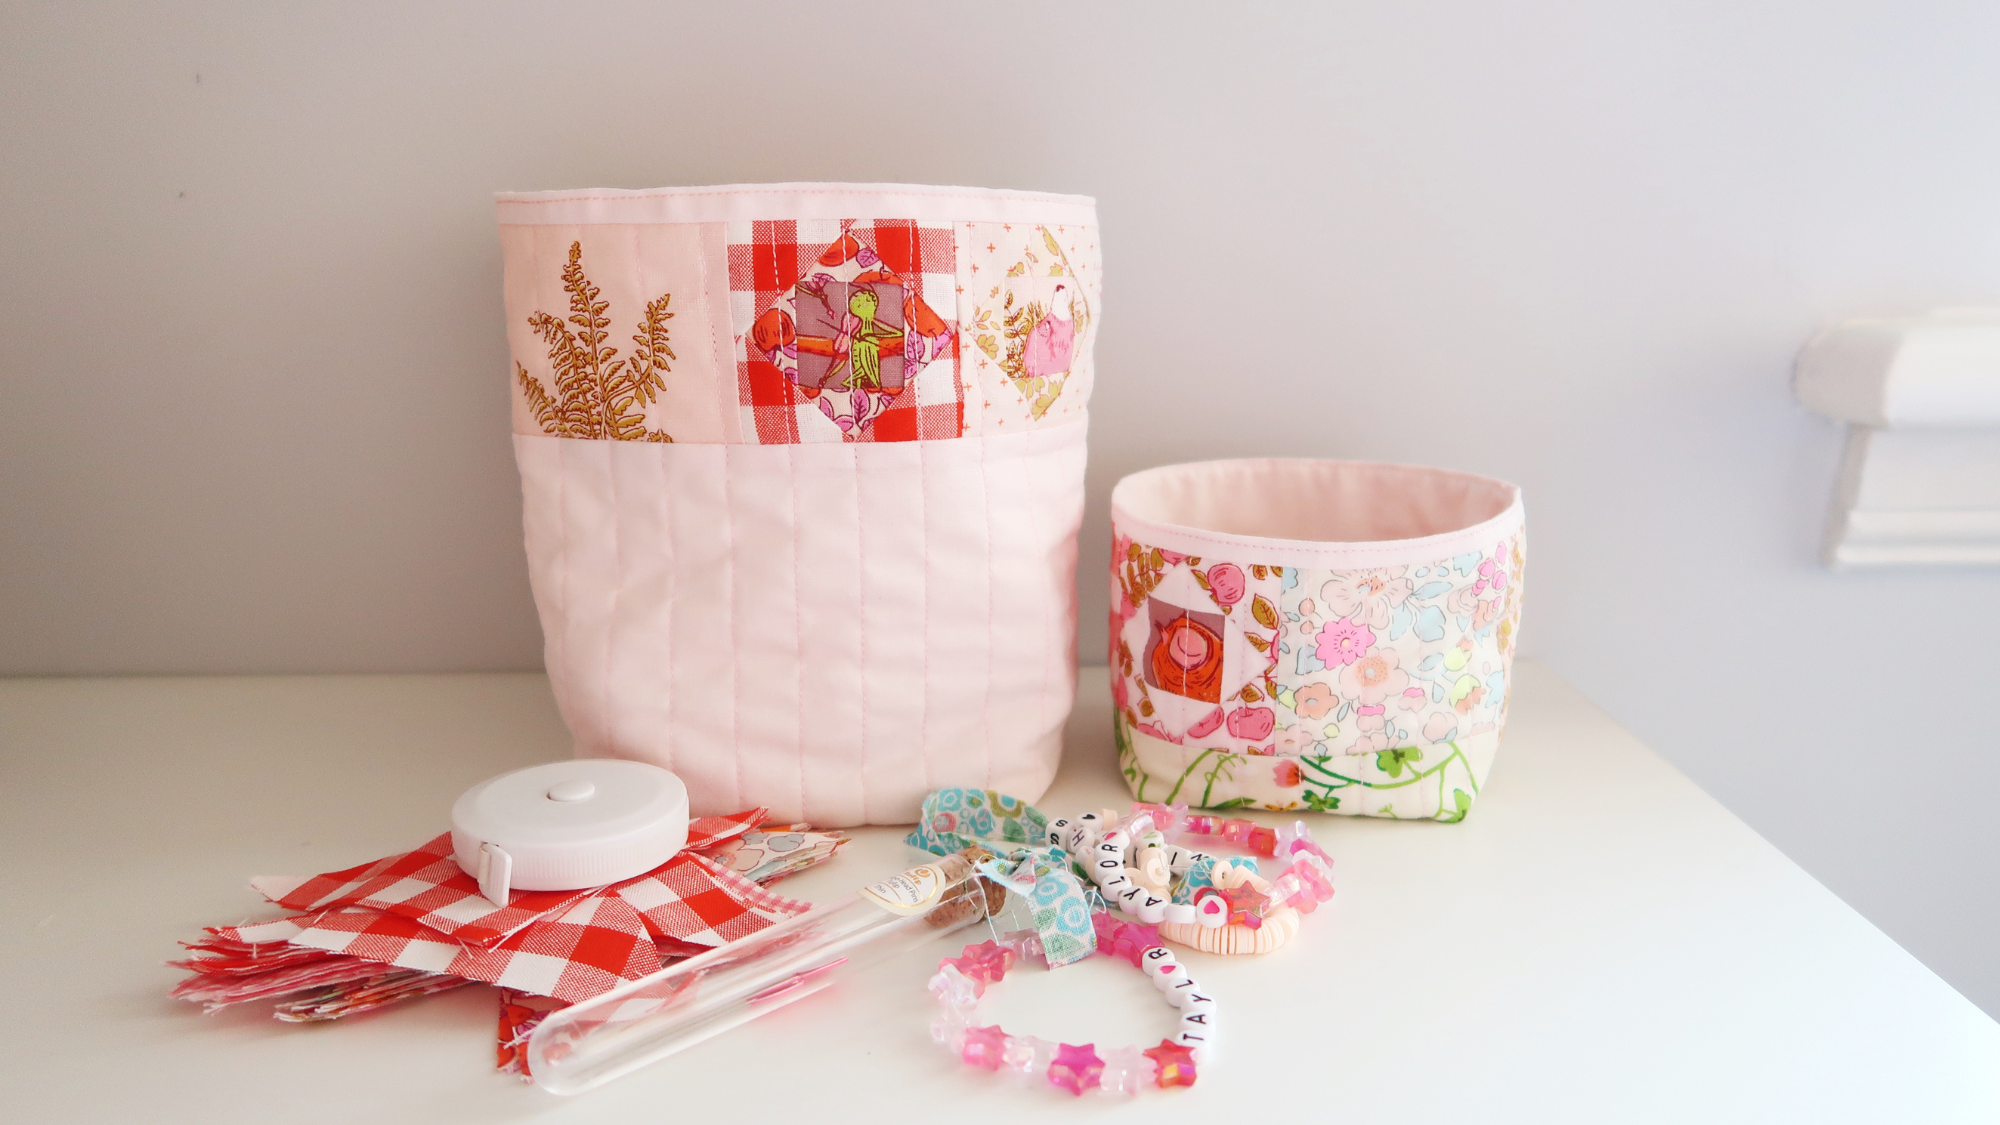 Super Simple Basket - sewing pattern and video tutorial for beginners